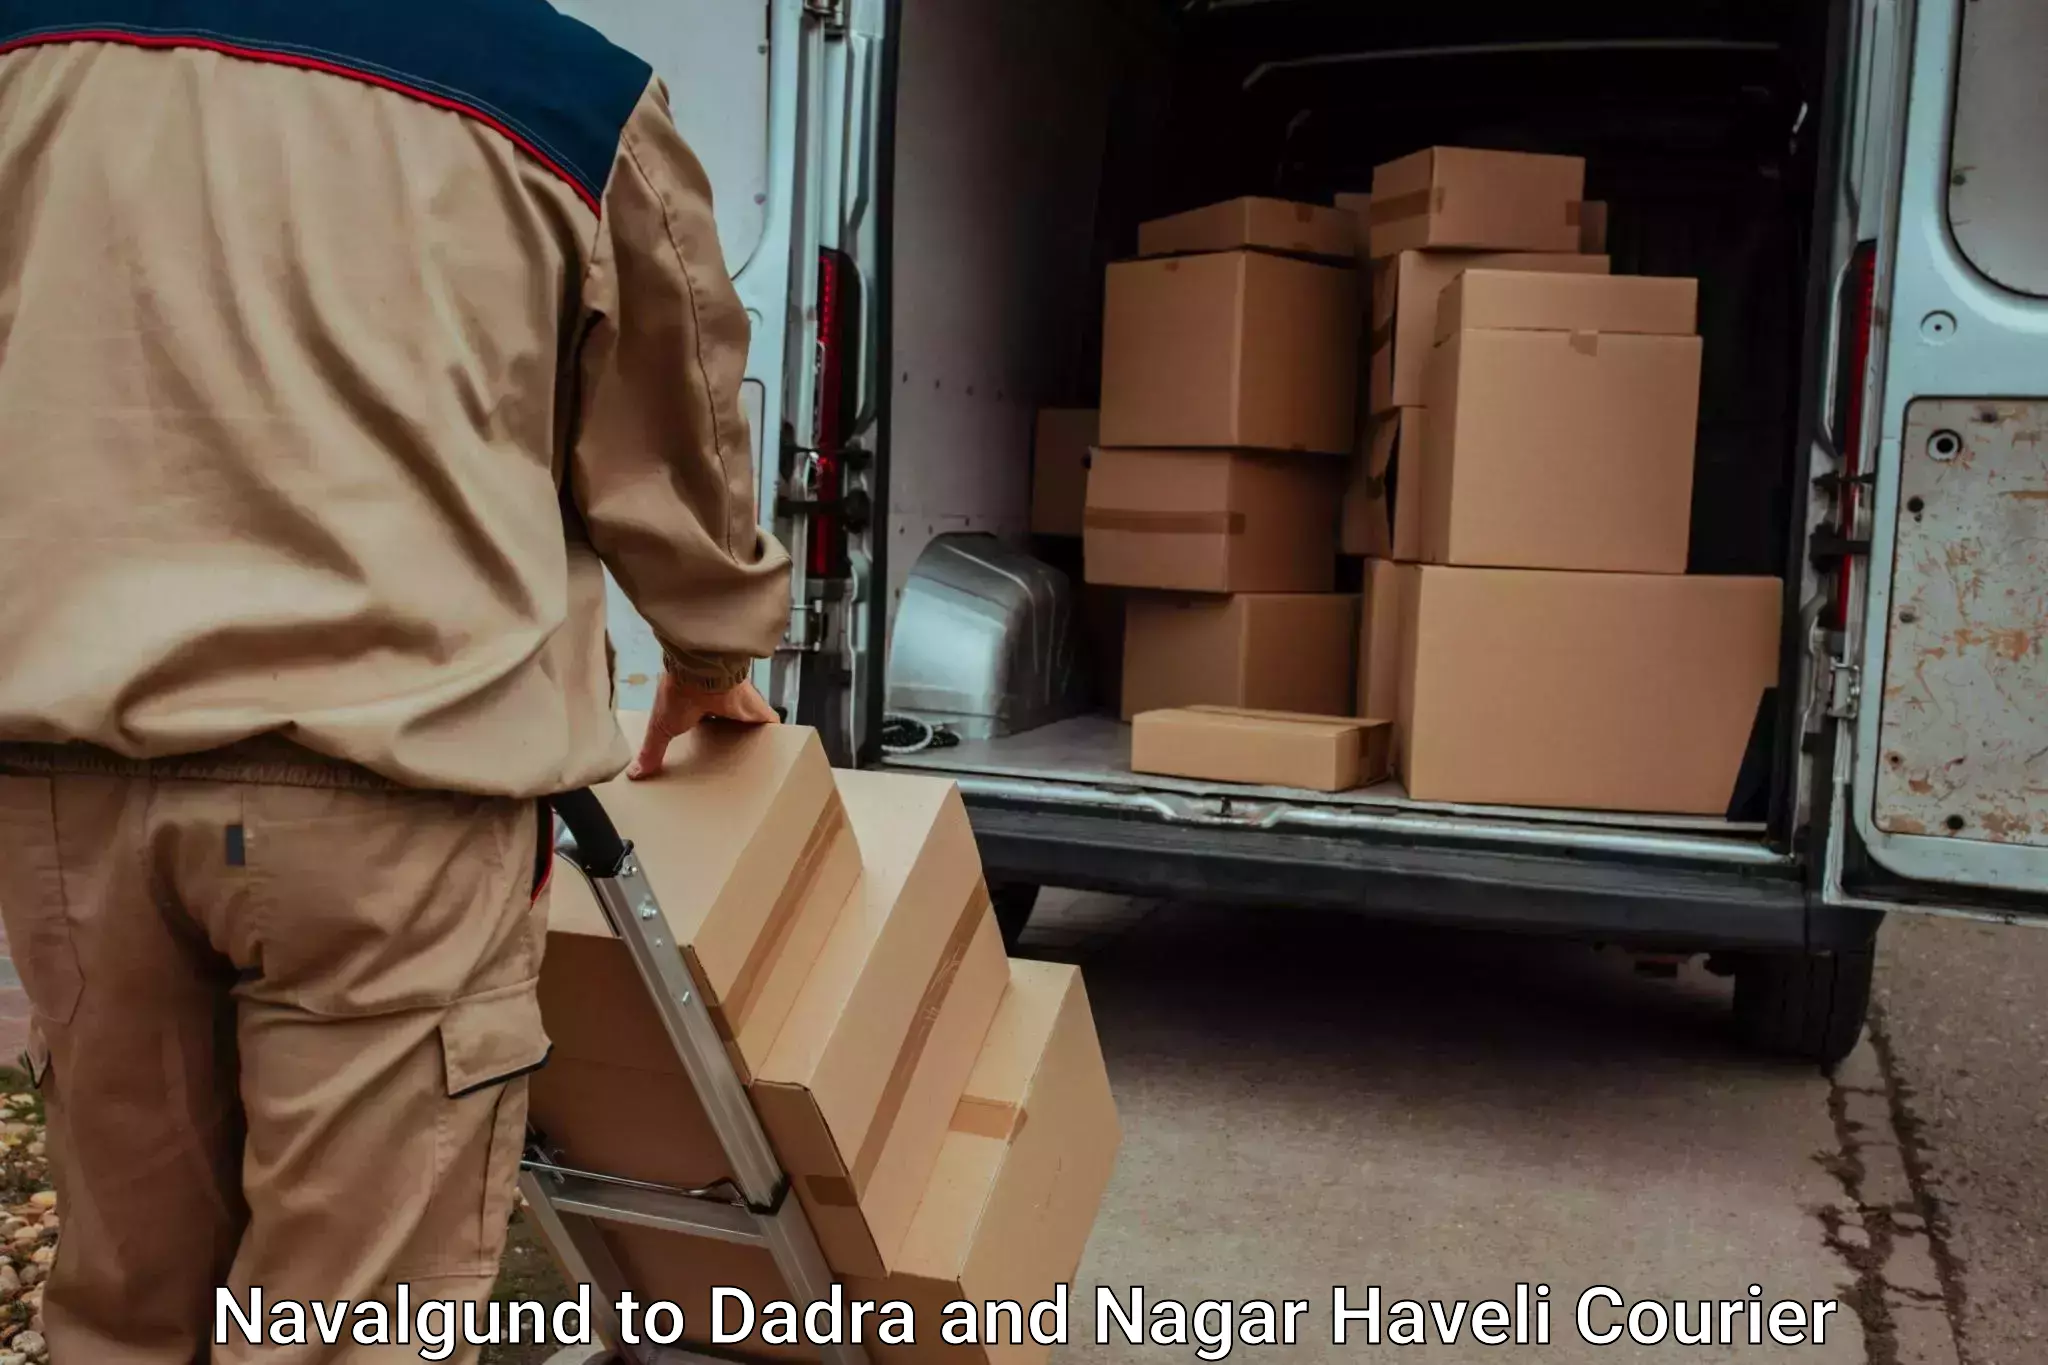 Reliable moving assistance Navalgund to Dadra and Nagar Haveli